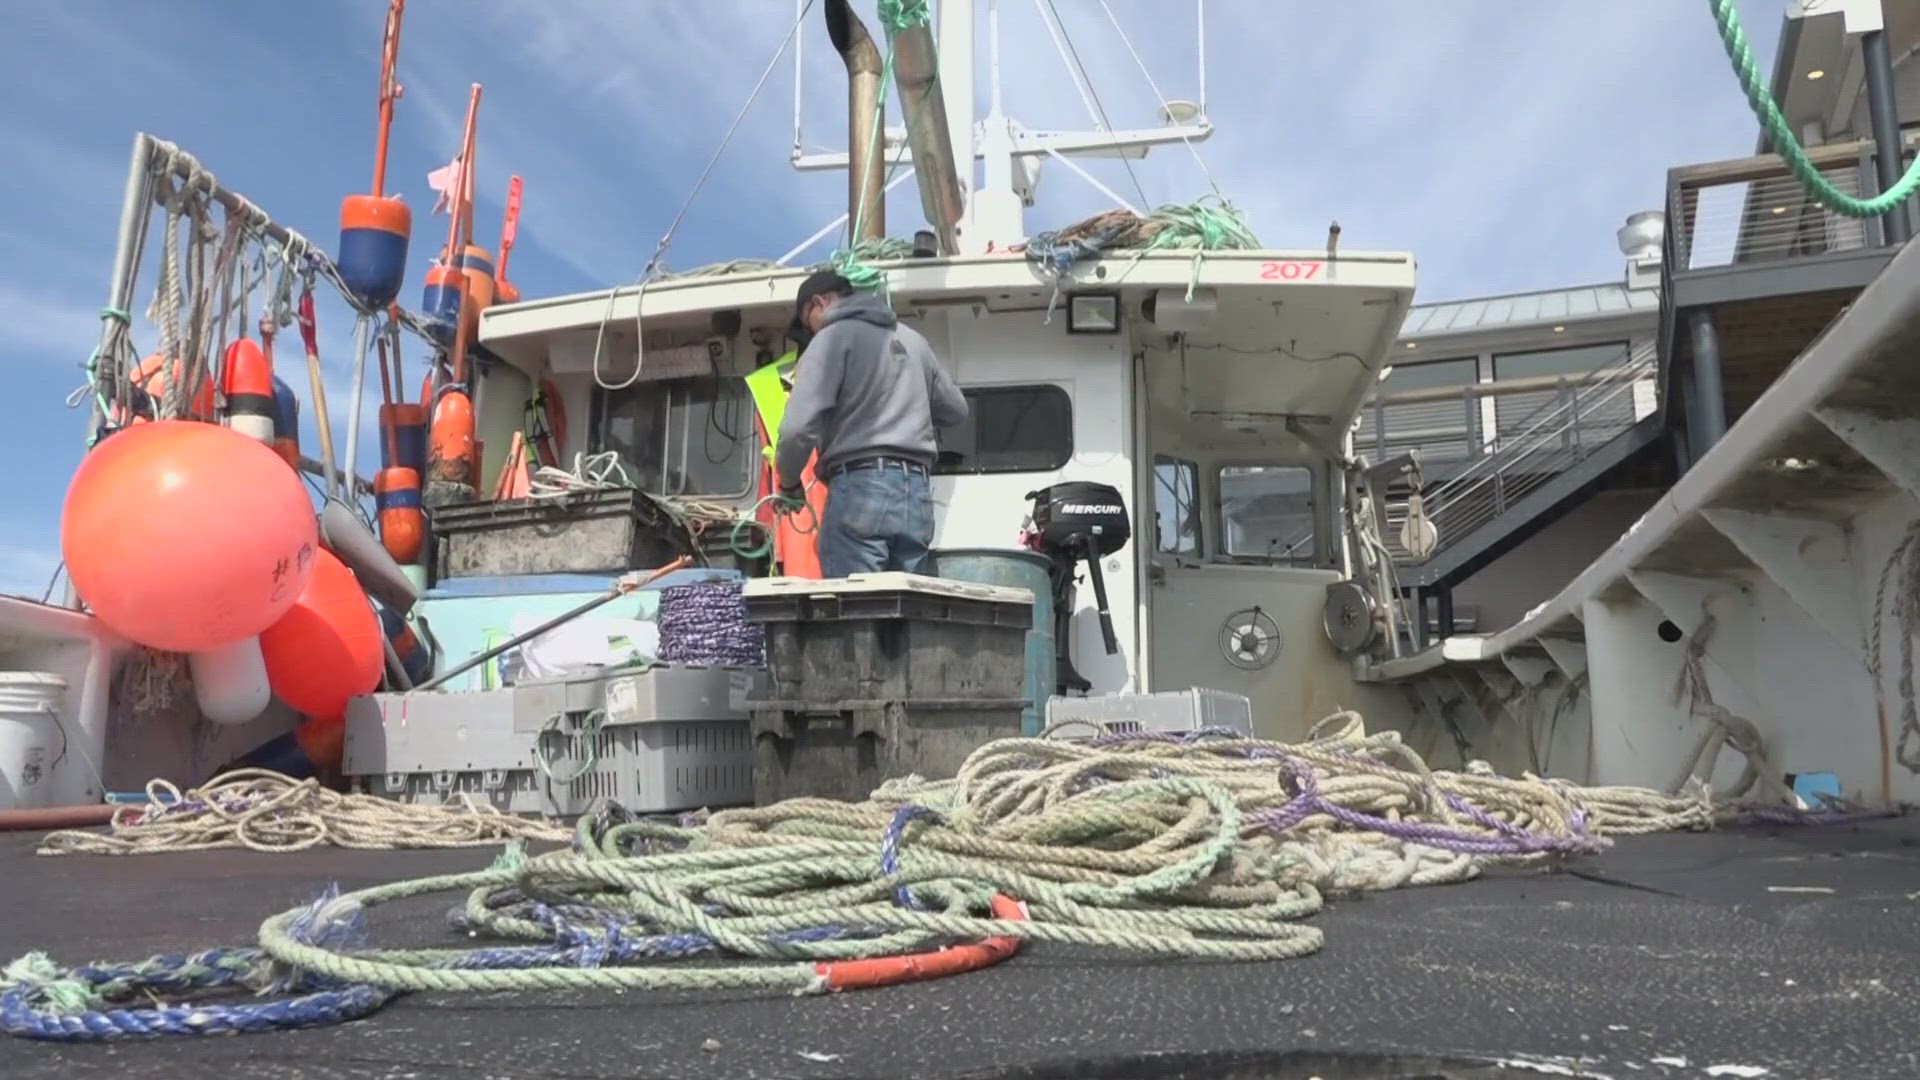 The lawmakers want to expand a federal commercial fishing occupational safety program that funds research and training.